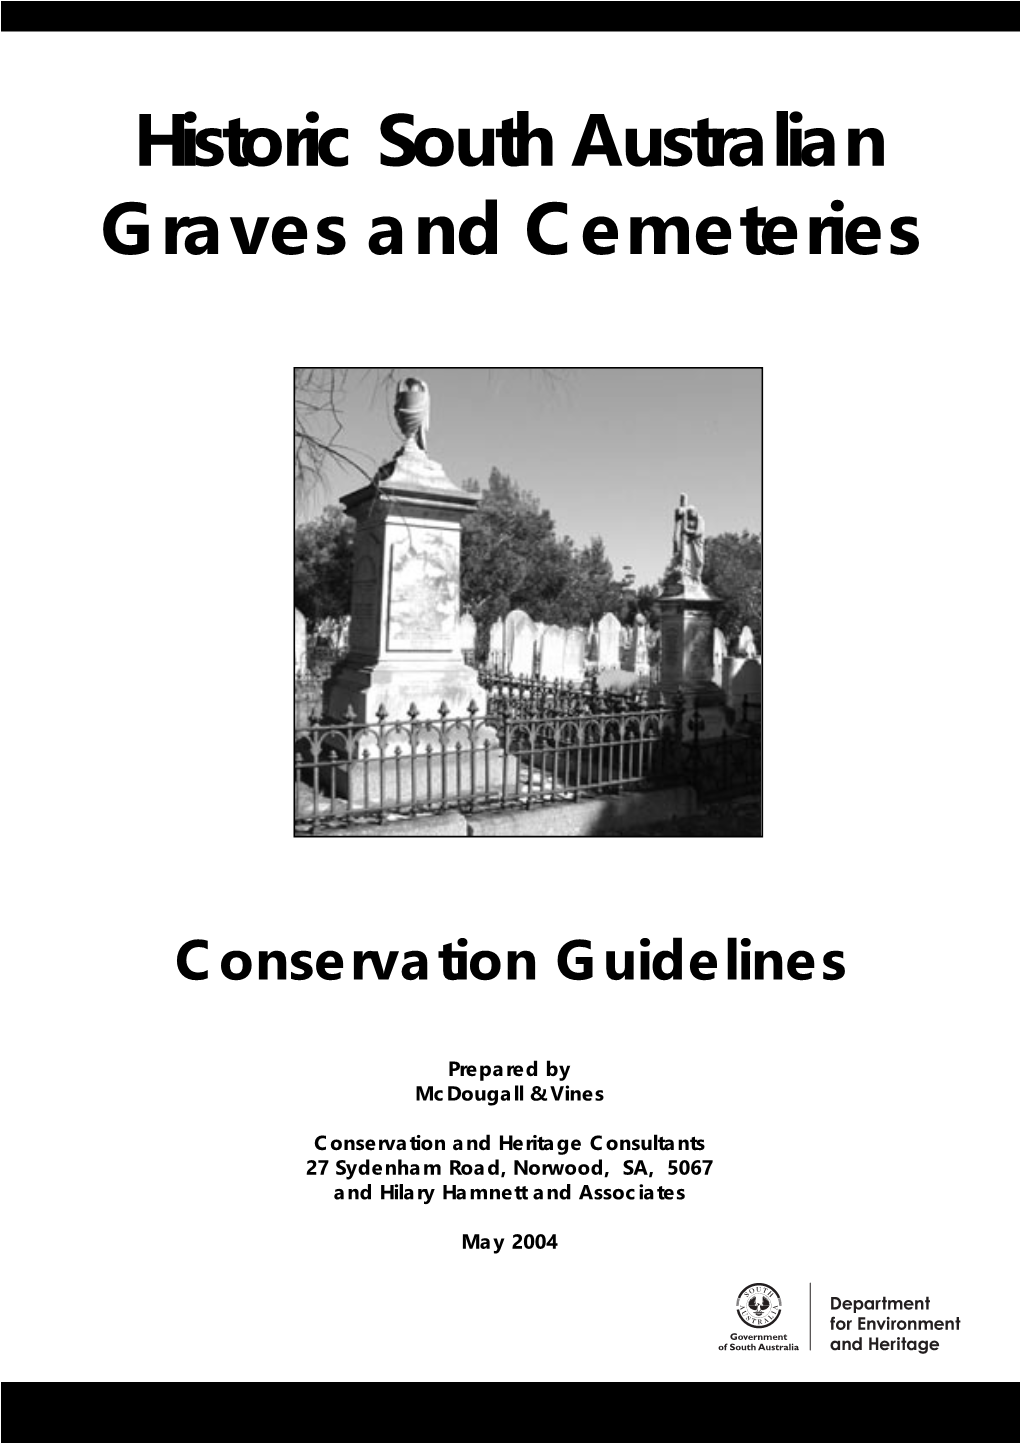 Conservation of Historic South Australian Graves and Cemeteries